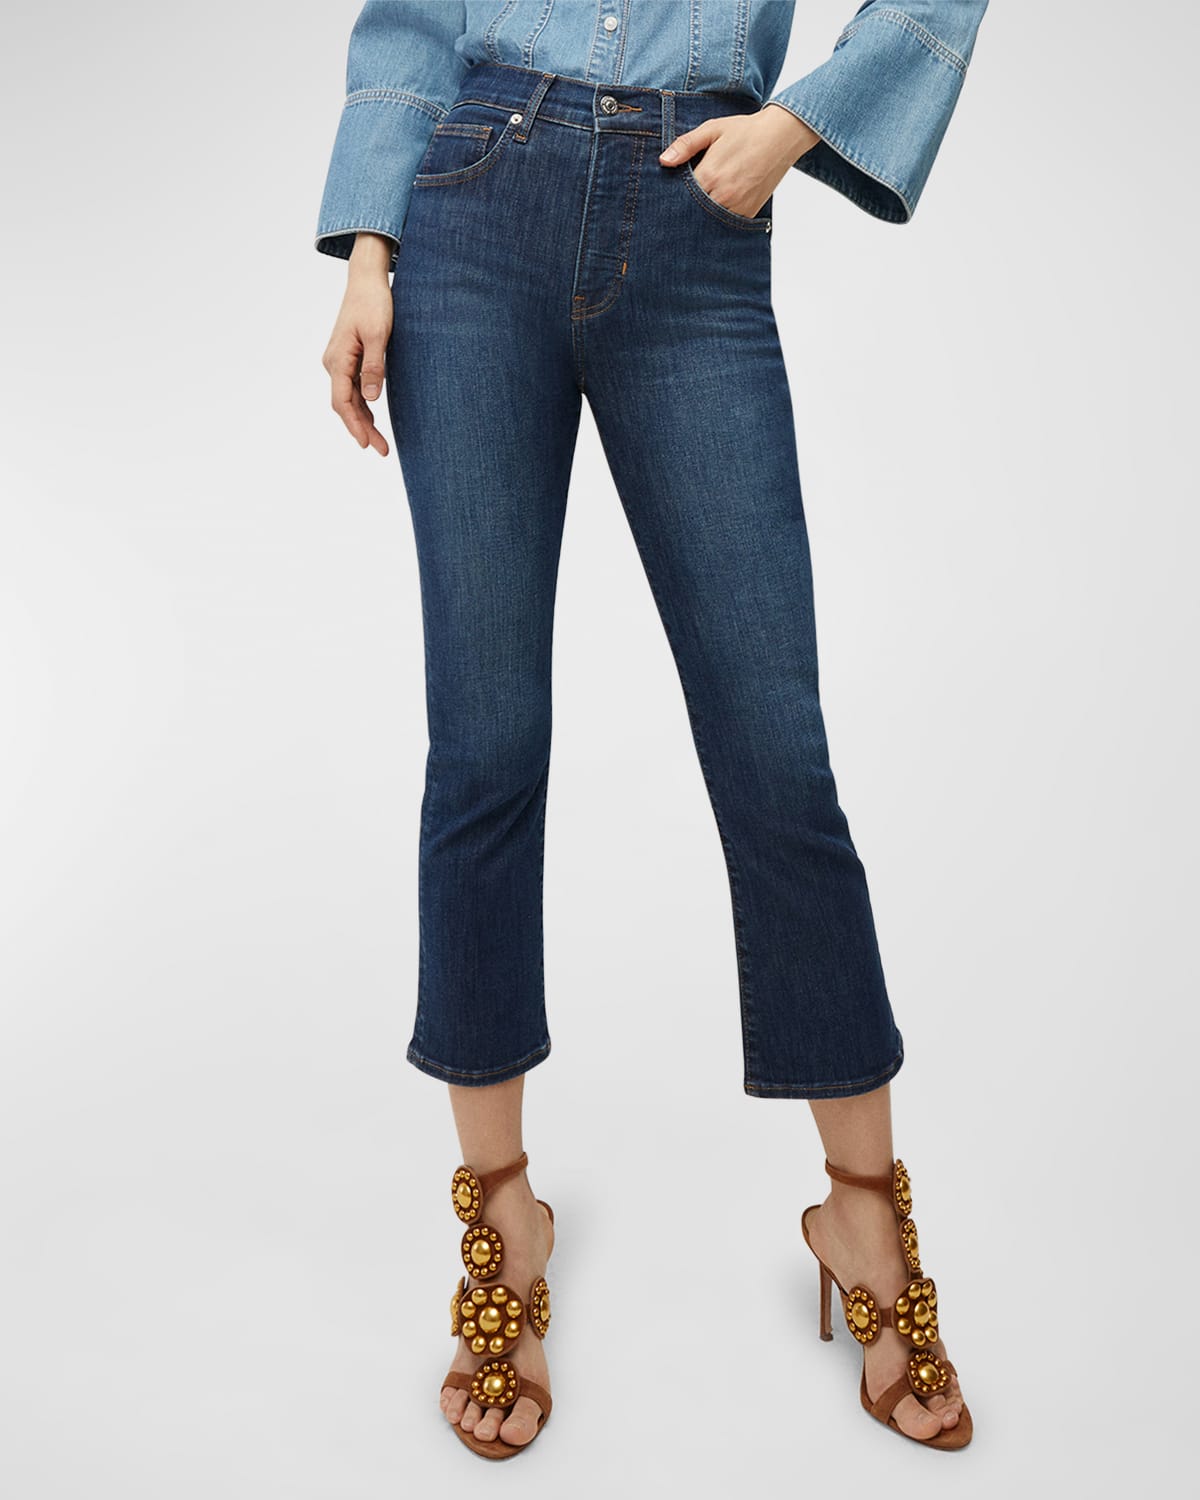 Veronica Beard Jeans Carly Kick Flare Ankle Jeans In Bright Blue